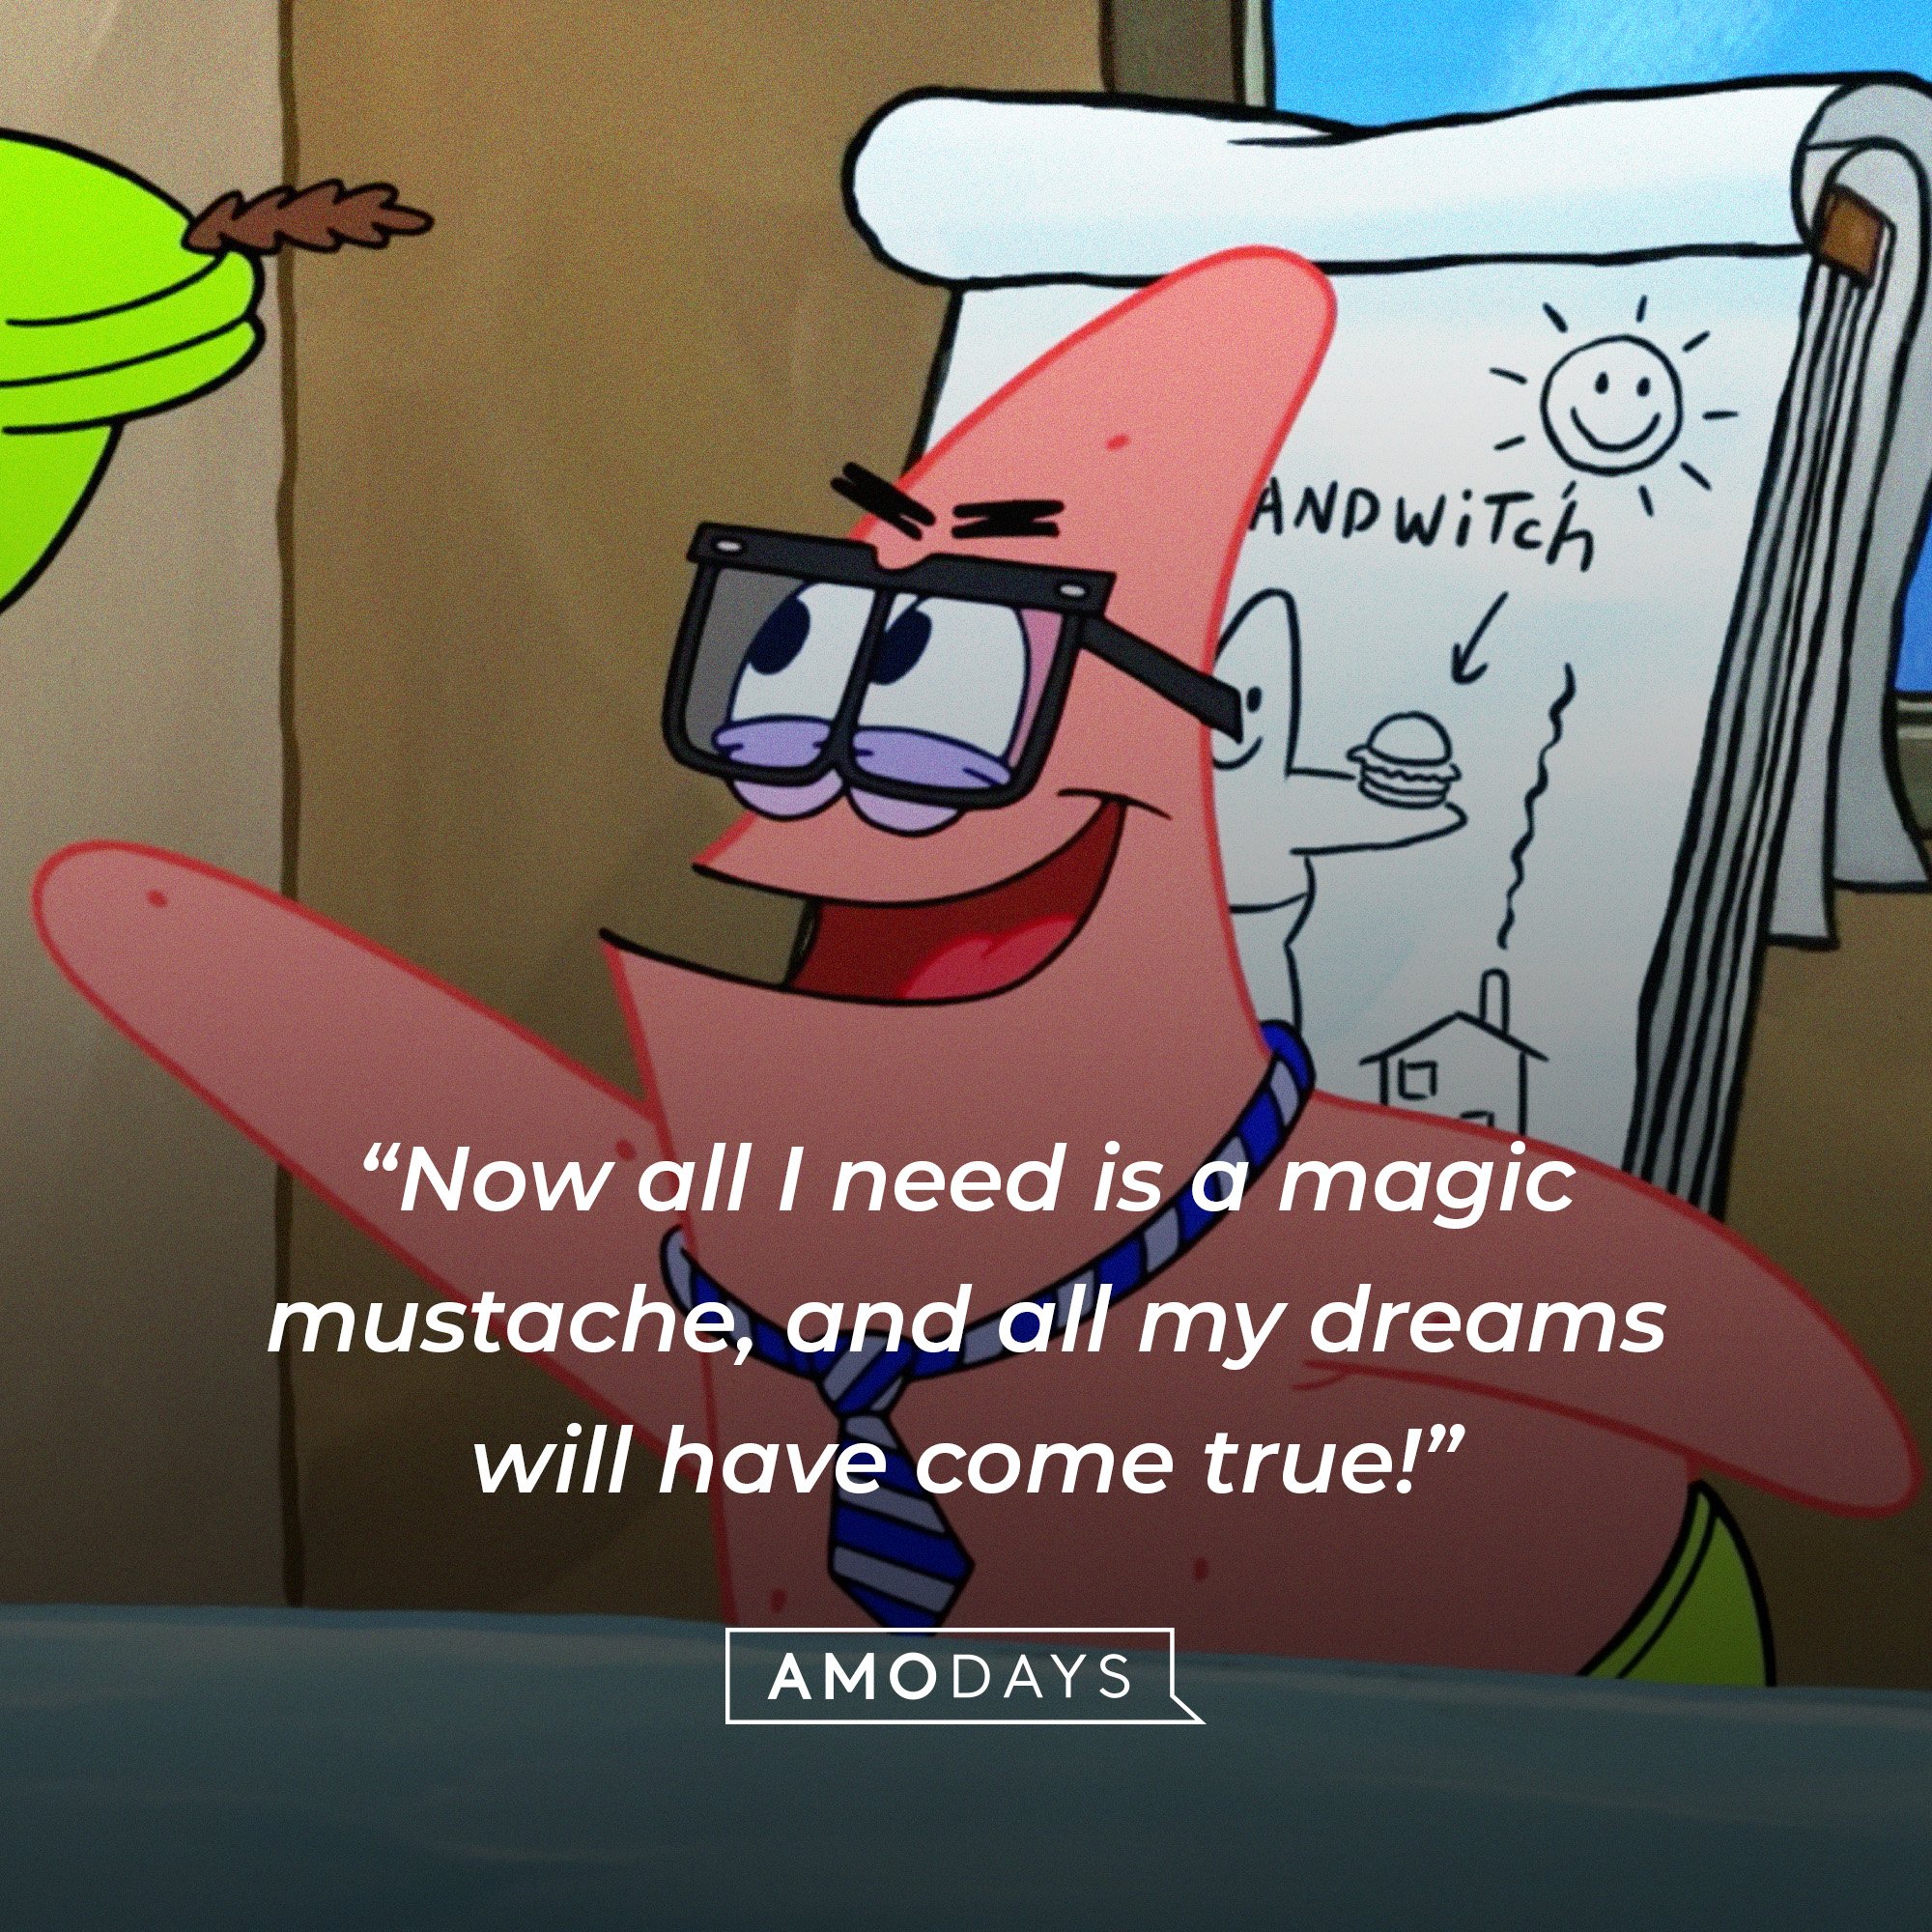 Patrick Star’s quote: “Now all I need is a magic mustache, and all my dreams will have come true!” | Image: AmoDays